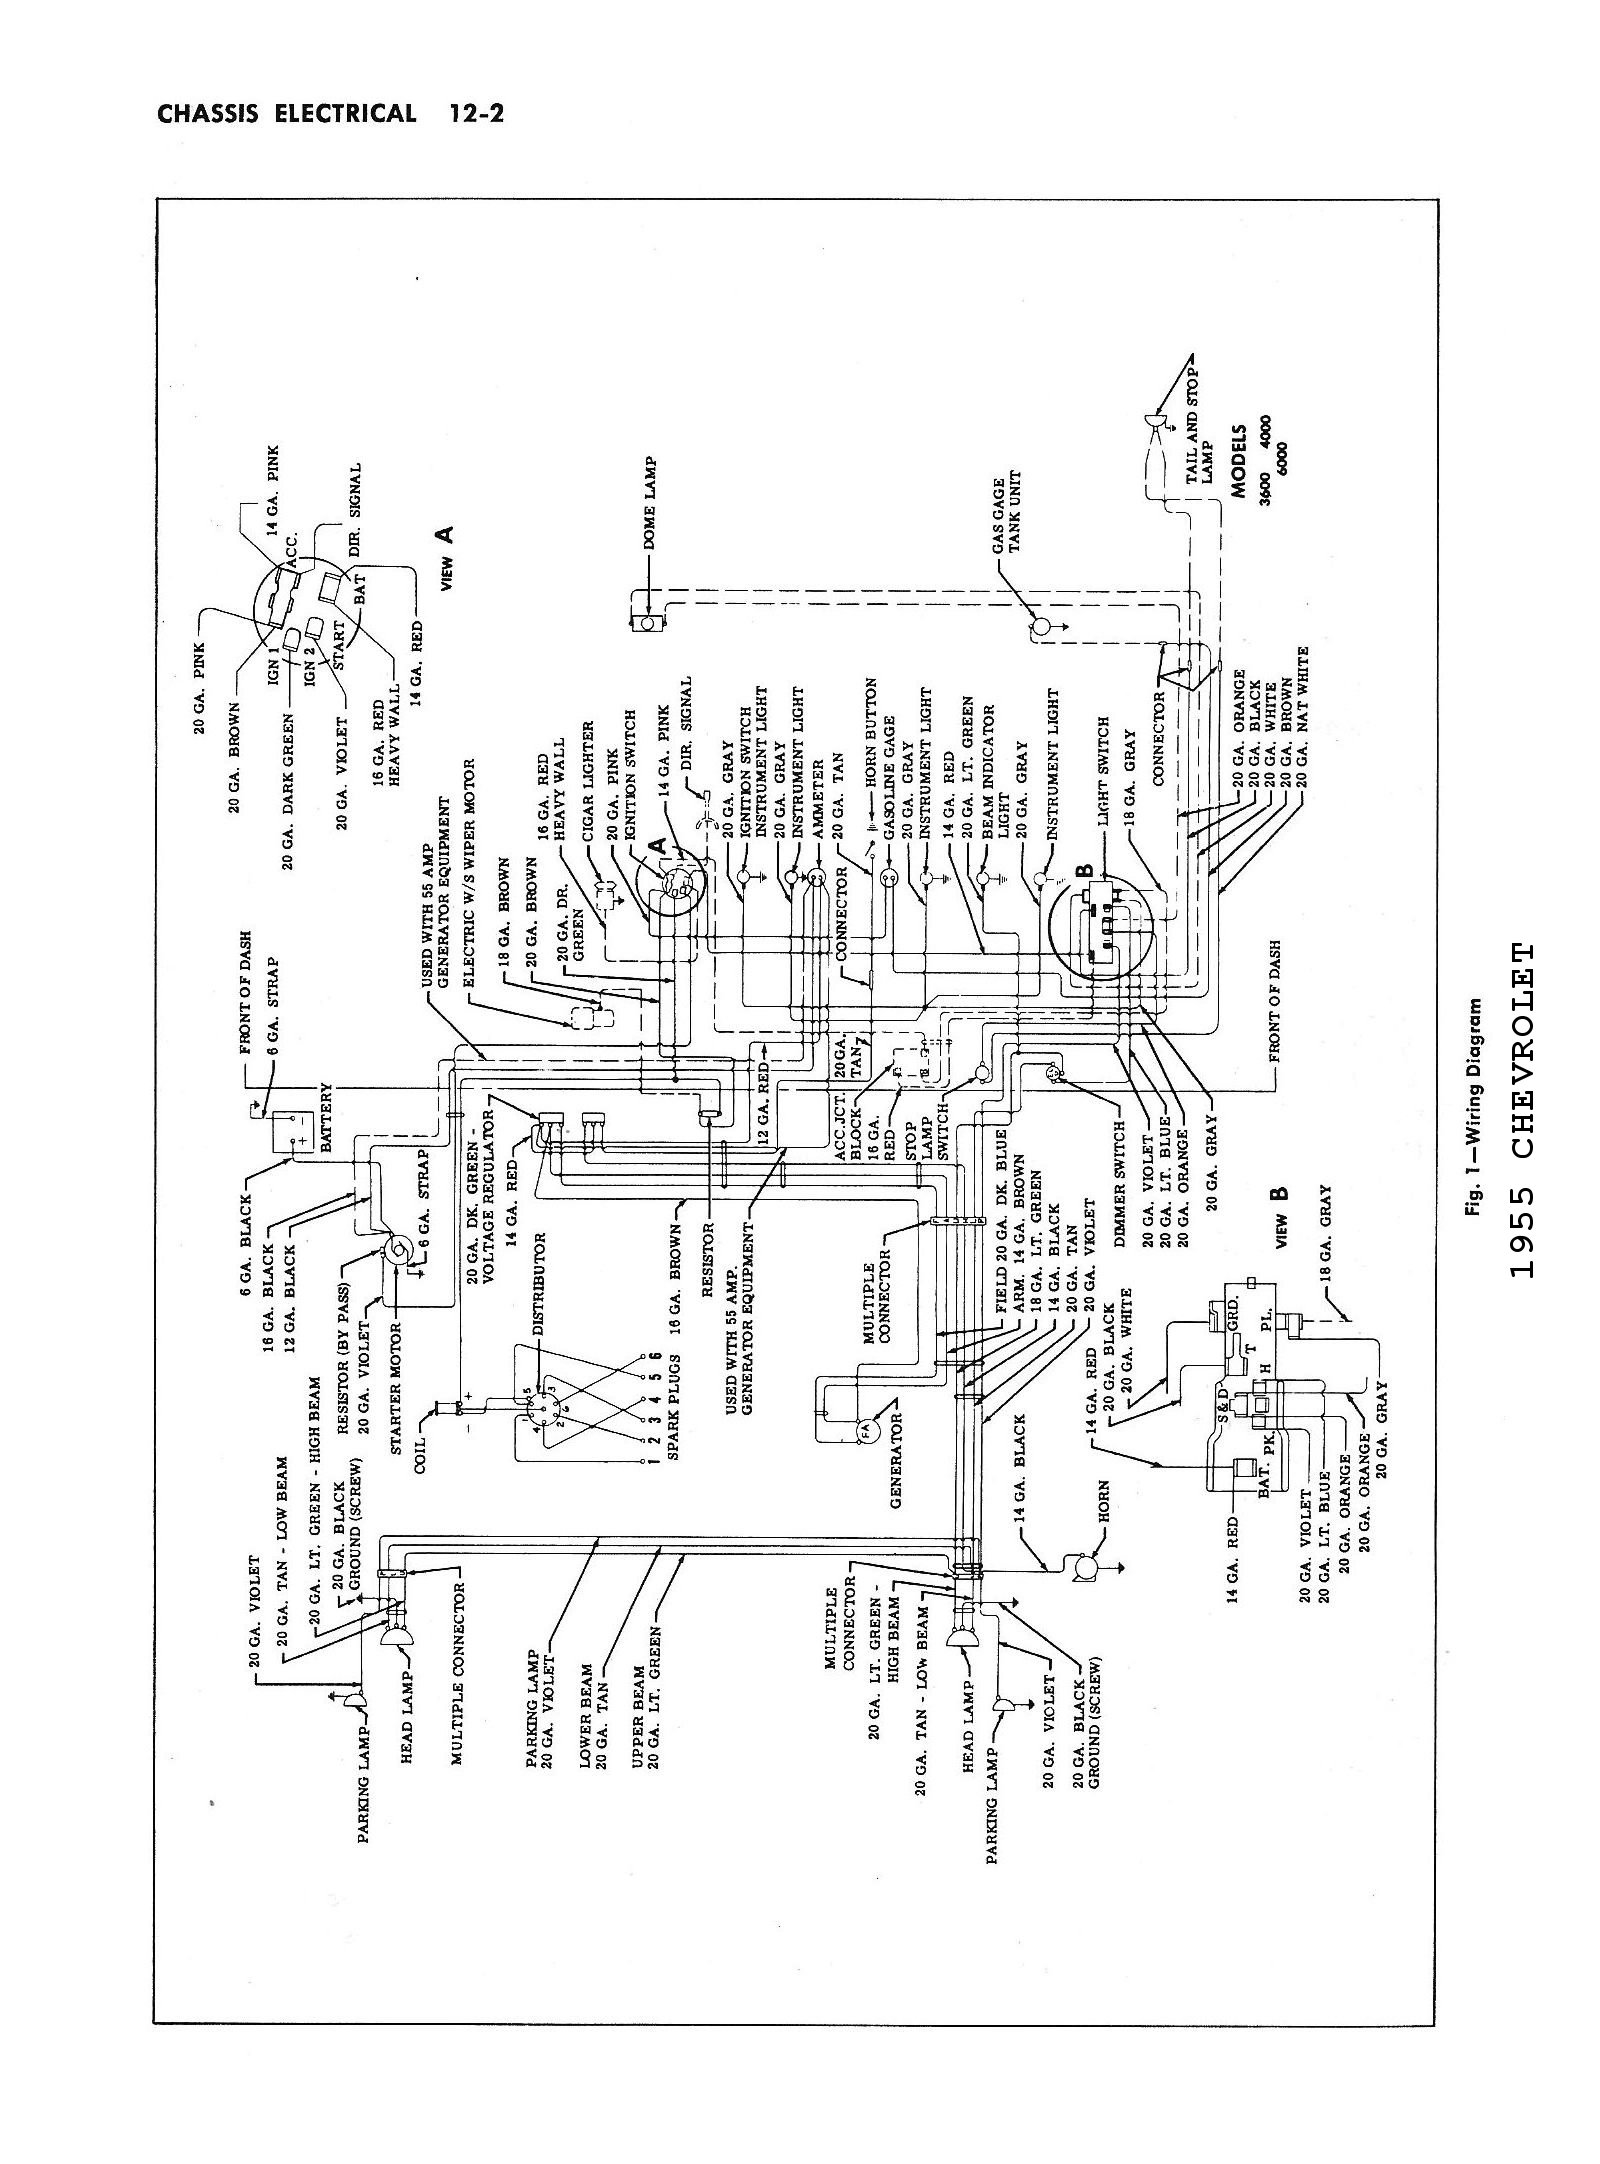 1961 Chevrolet Wiring Diagram from chevy.oldcarmanualproject.com